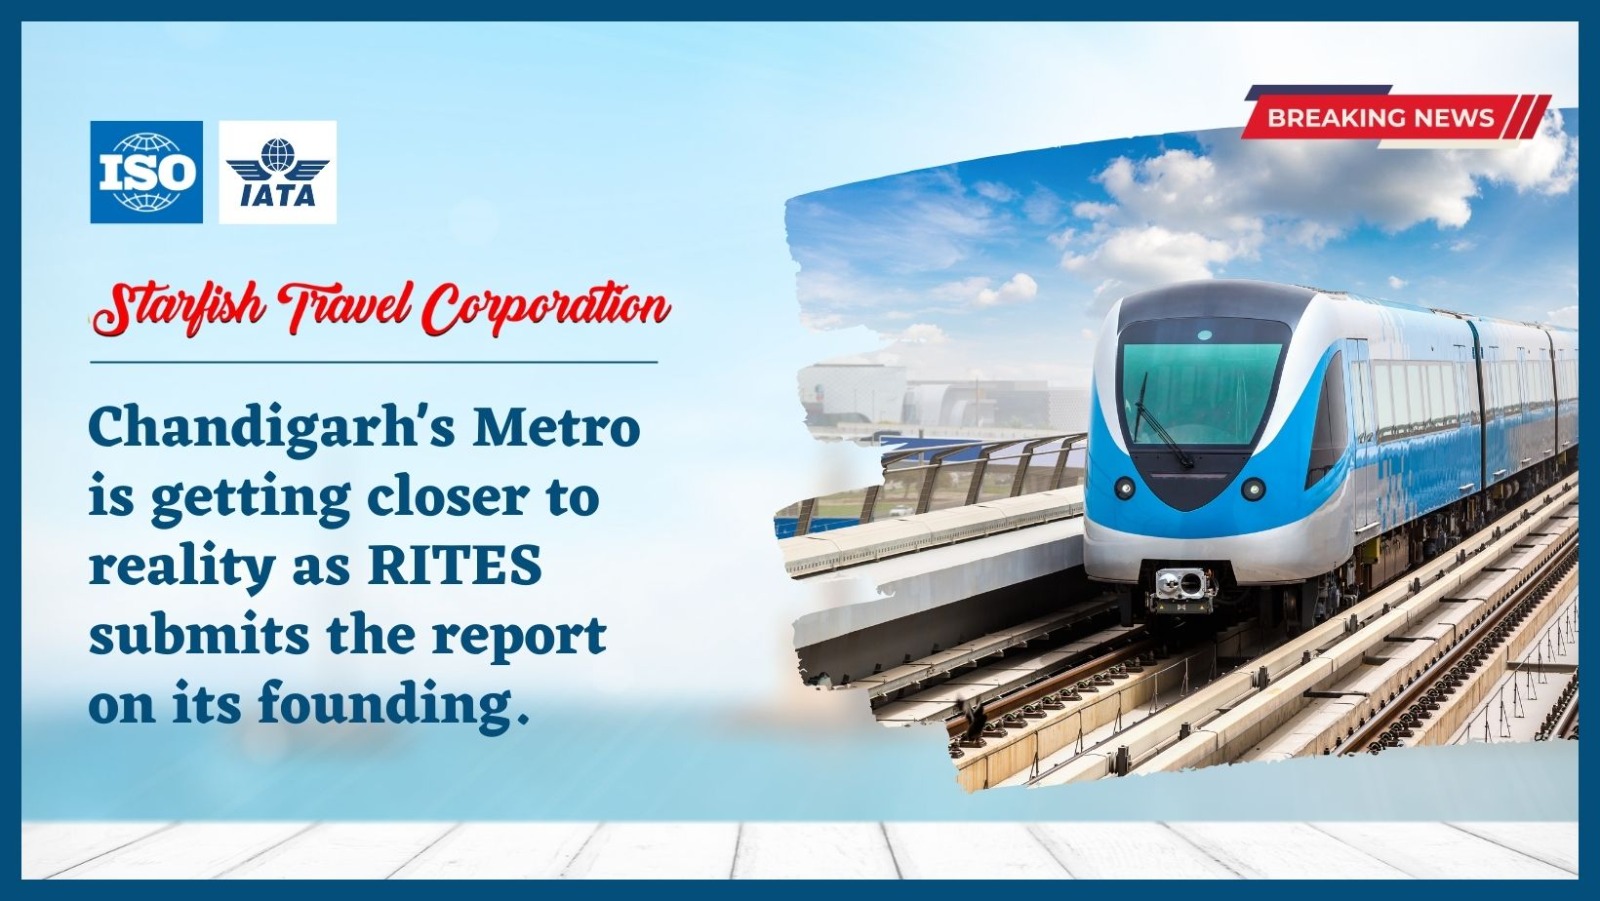 Chandigarh’s Metro is getting closer to reality as RITES submits the report on its founding.